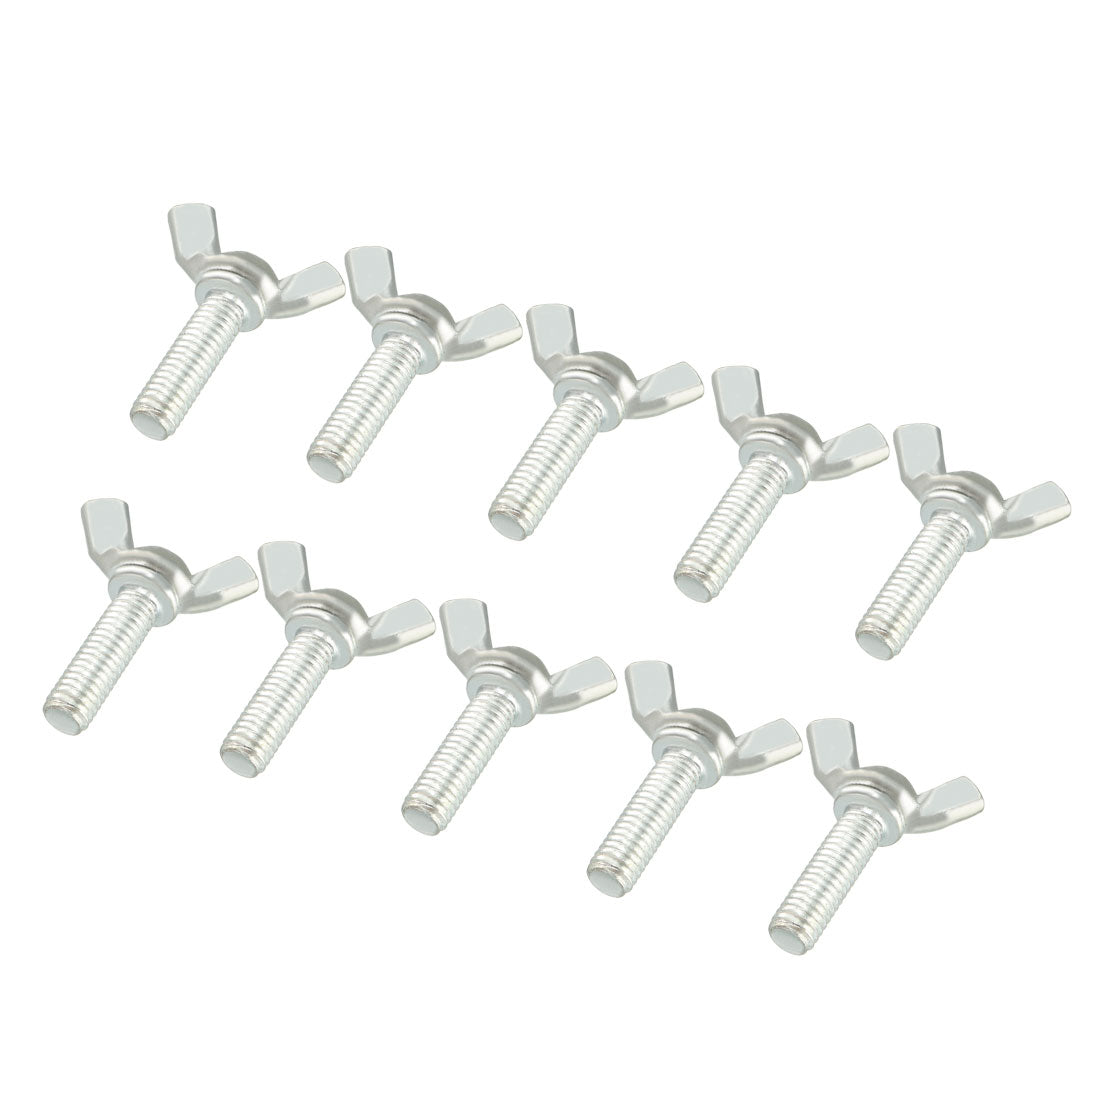 uxcell Uxcell Wingbolt Butterfly Wing Thumb Hand Screws Bolts M6x20mm 1mm Pitch Carbon Steel 10pcs